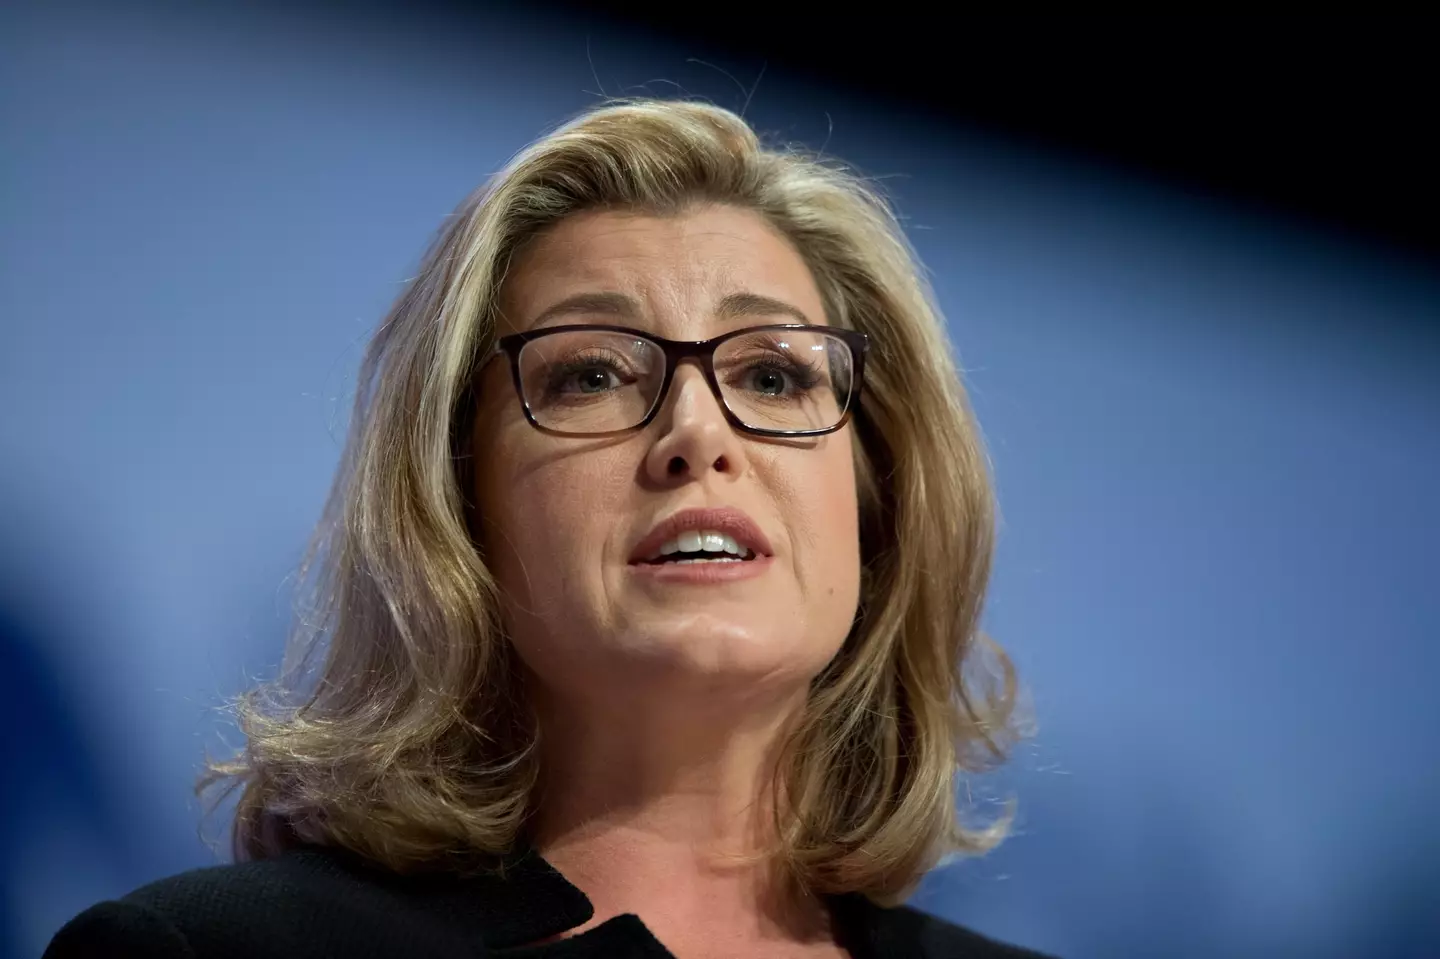 All hope is not entirely lost for Penny Mordaunt.